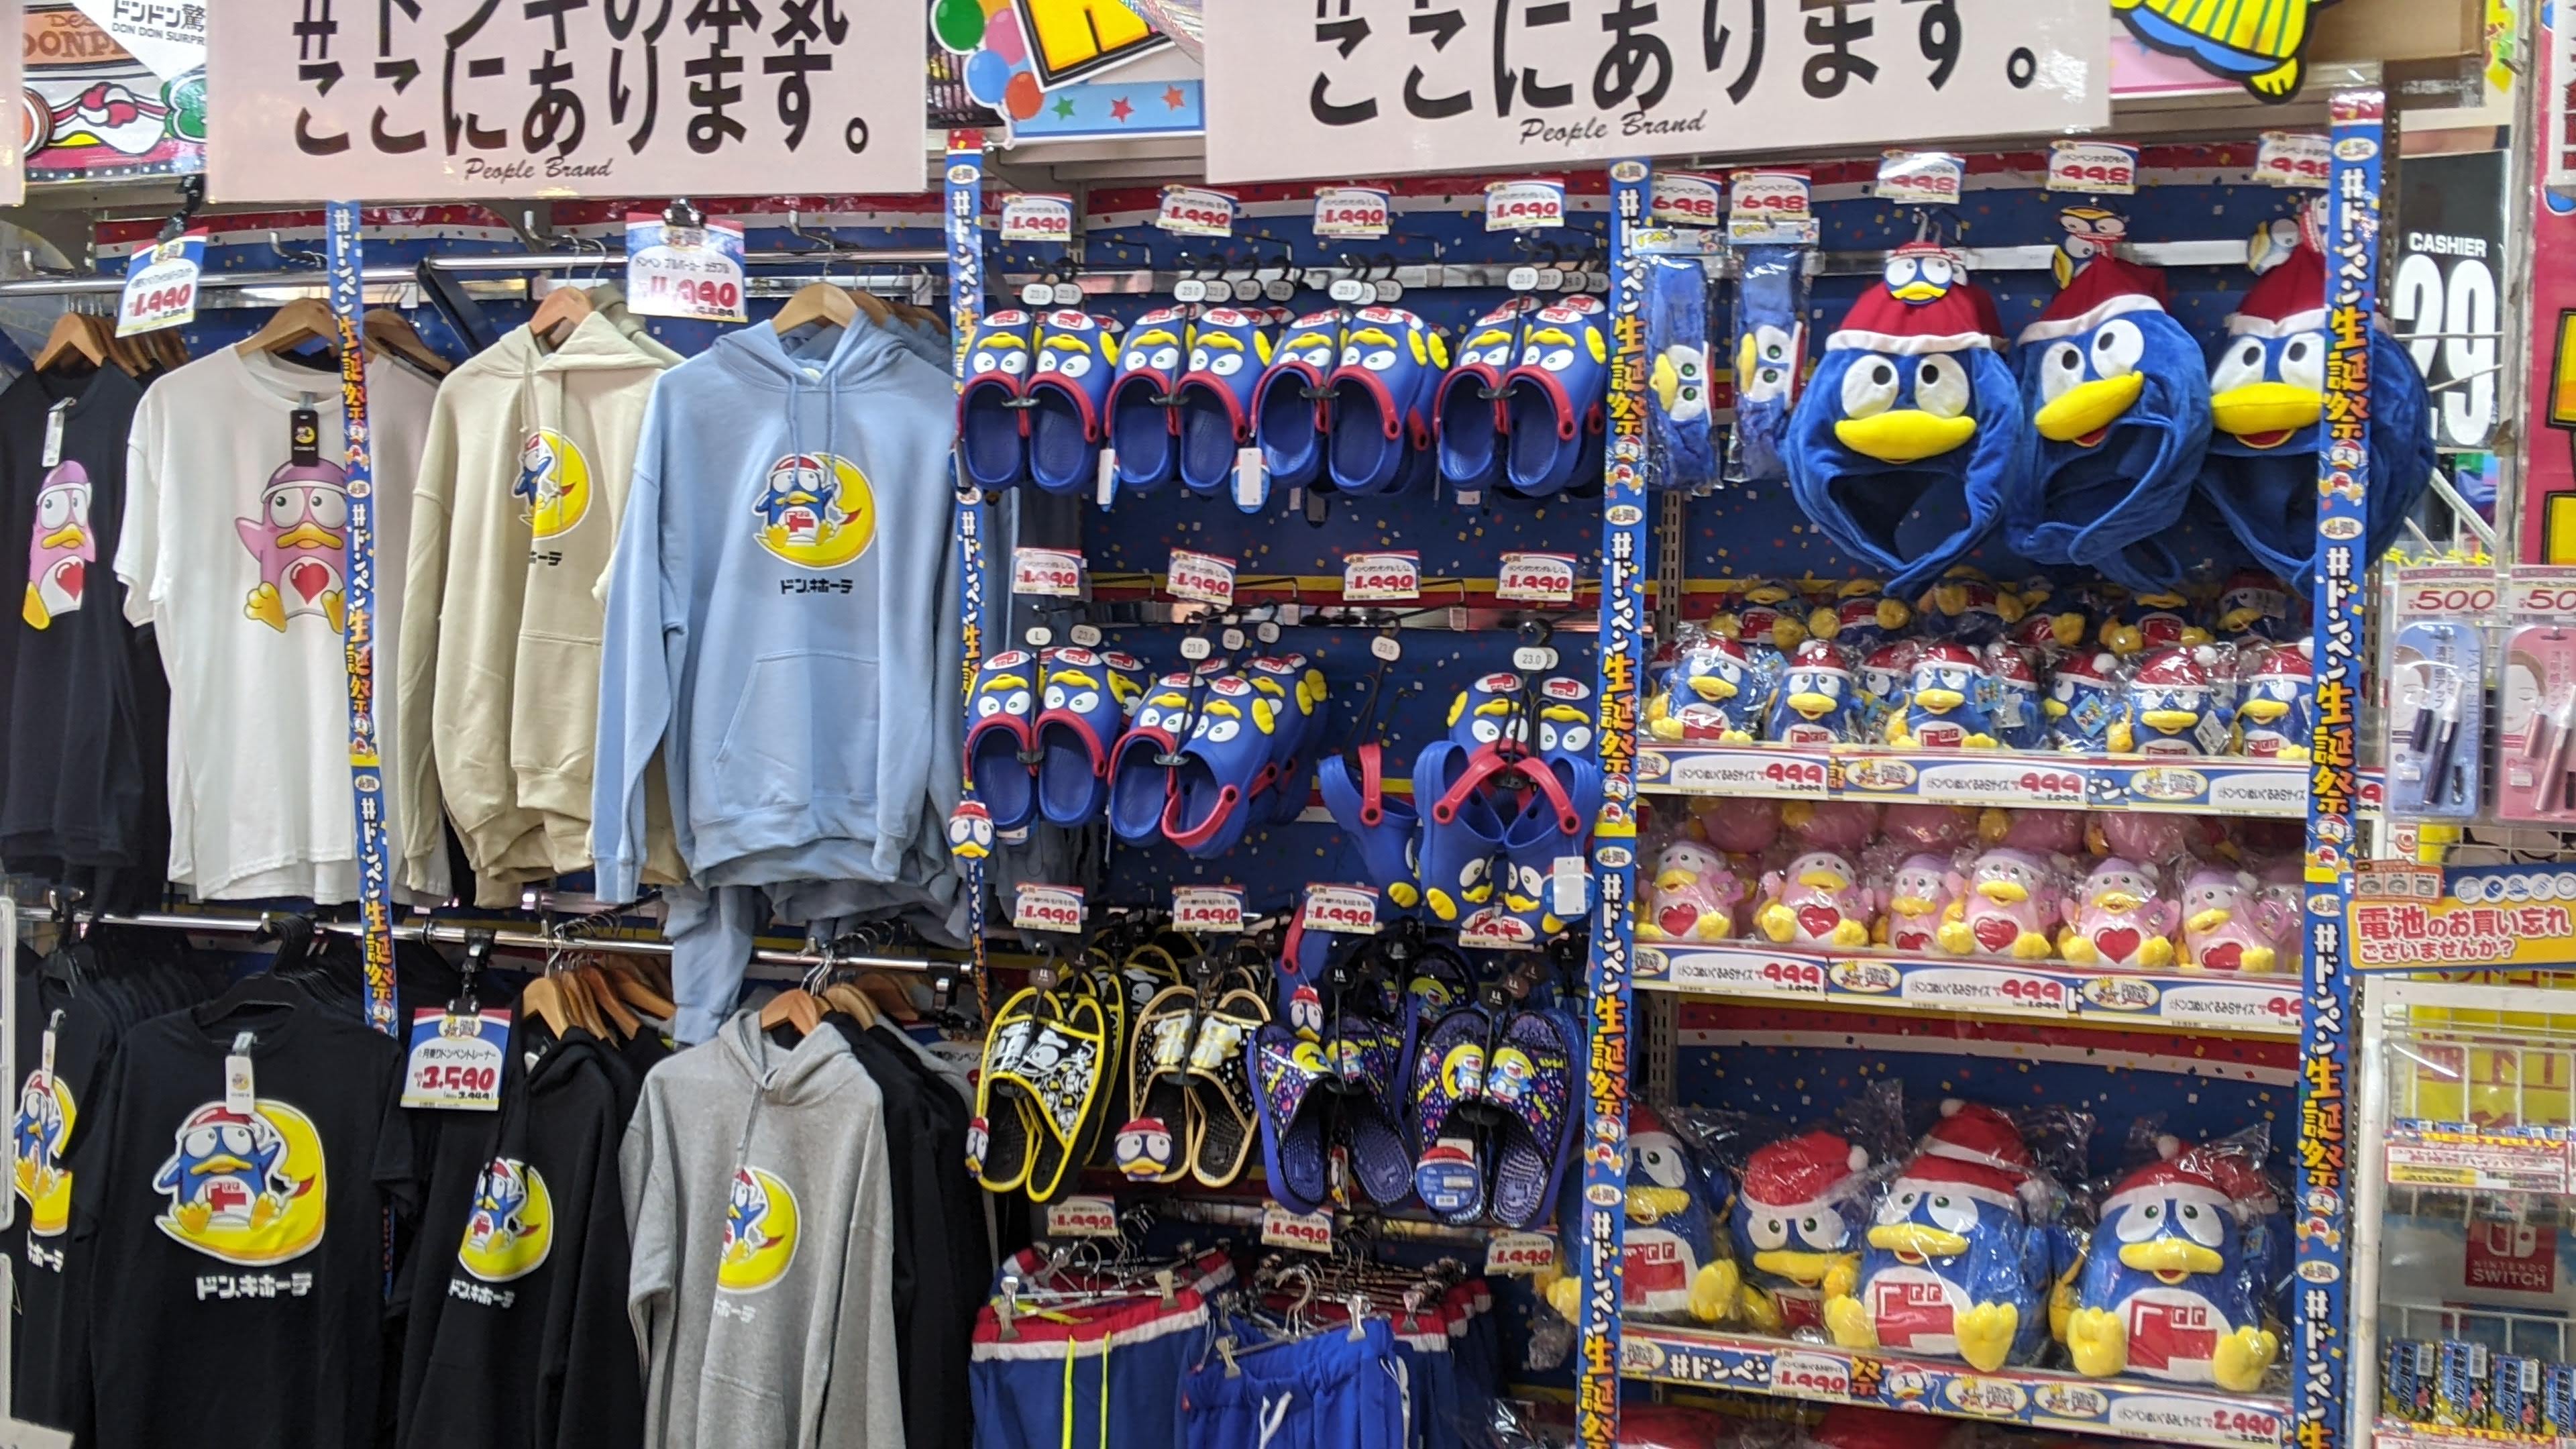 A display of penguin mascot shirts, slippers, and stuffed animals, etc.